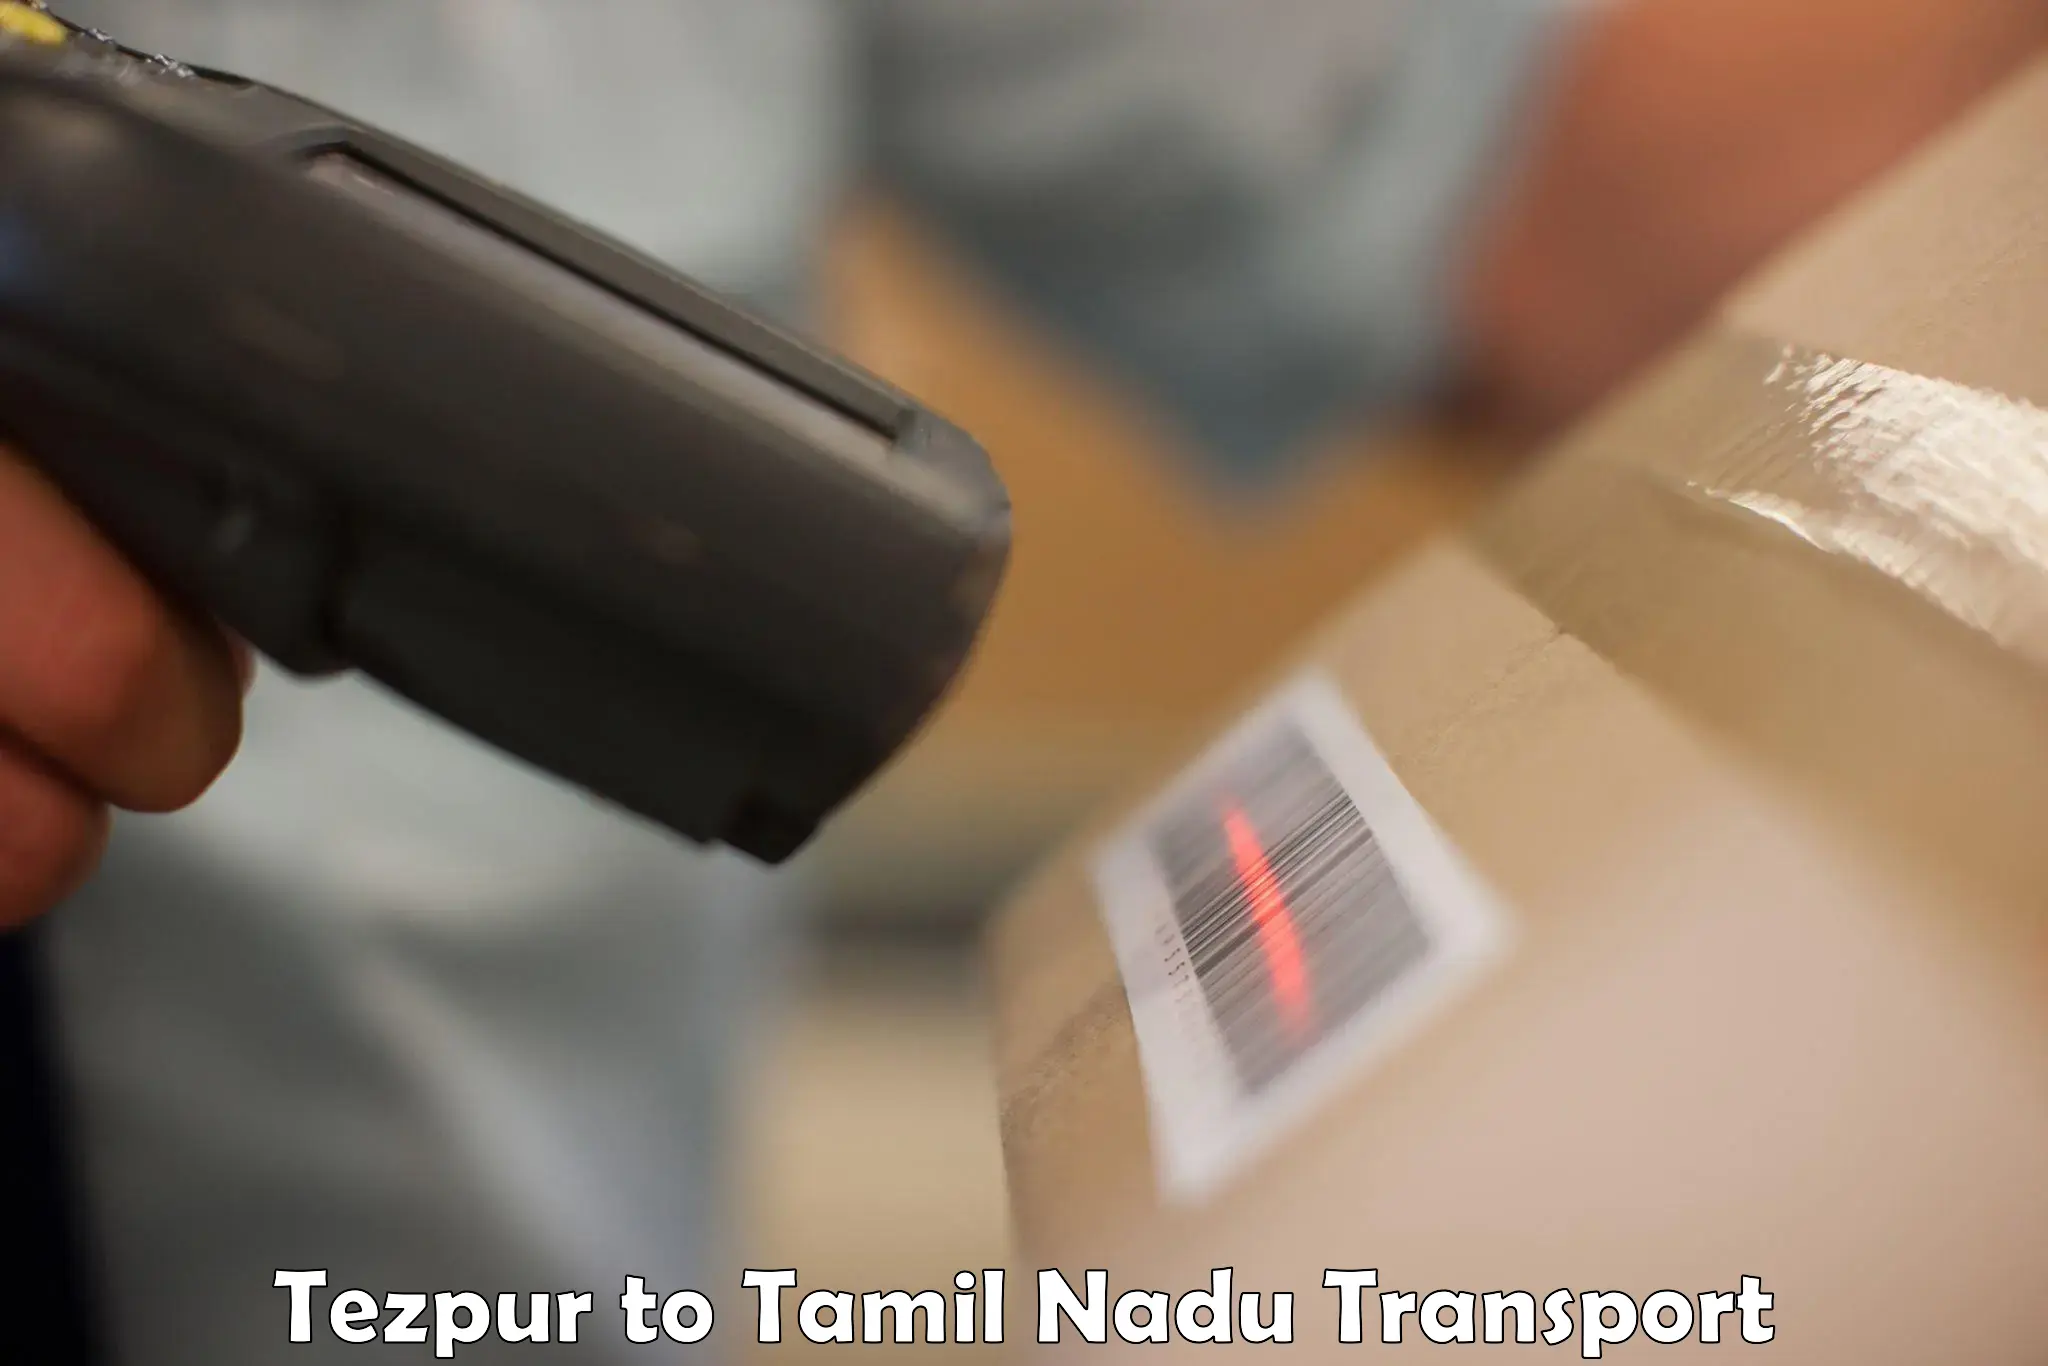 Nationwide transport services Tezpur to Vellore